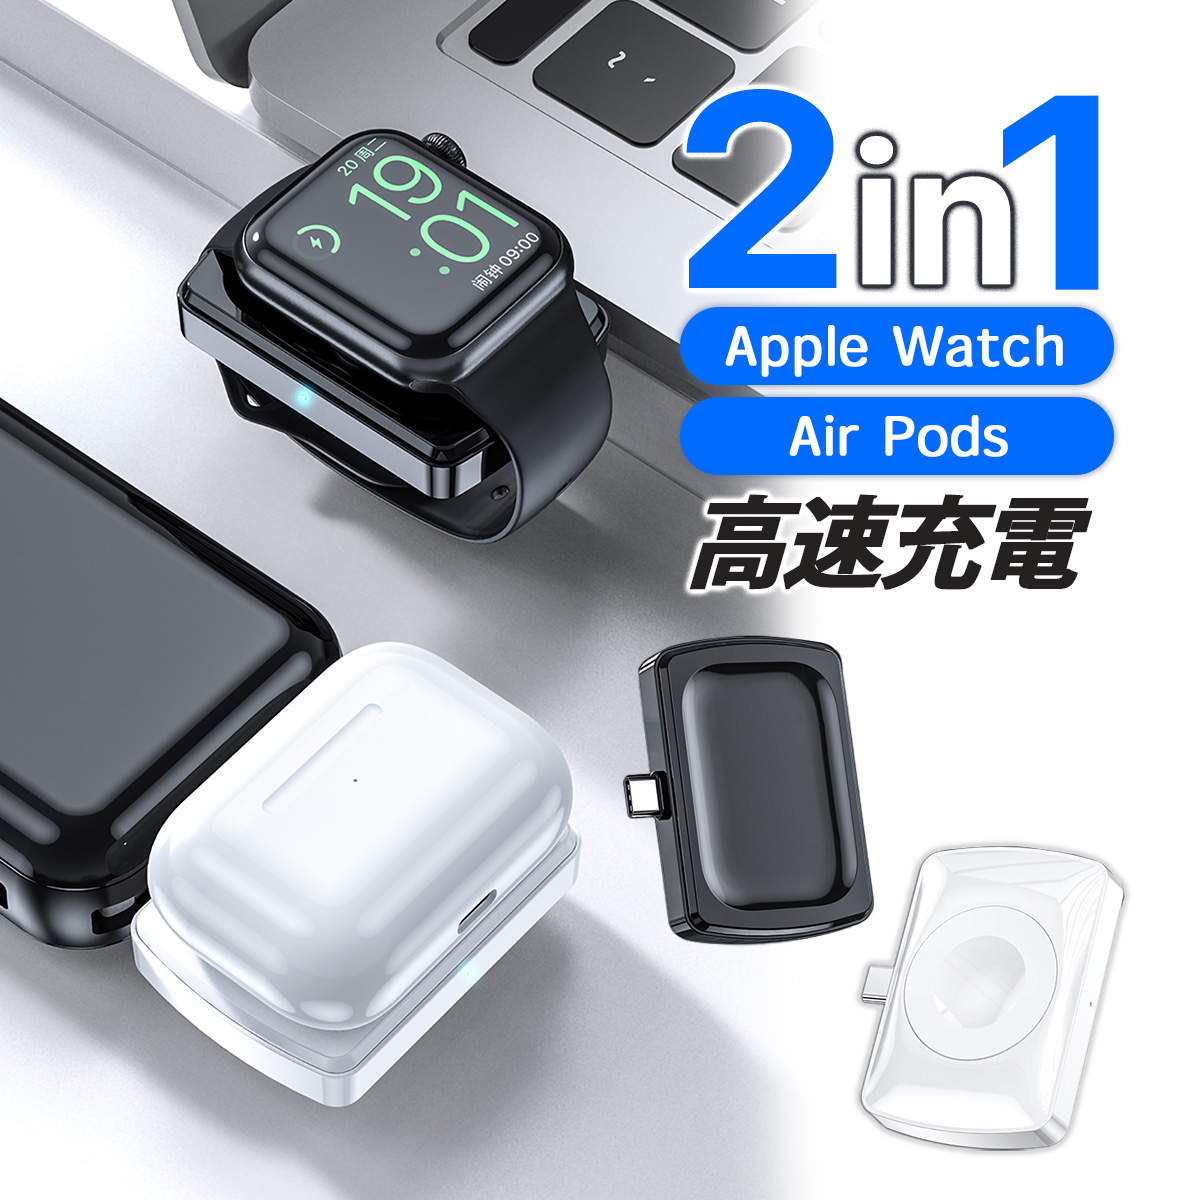 Apple Watch充電器  AirPods充電器  Watch Airpods ２in1 持ち運び  ワイヤレス  急速 高速充電 アップルウォッチ AirPods AirPods Air PodsPro Type-C ケーブル不要 置くだけ充電 Qi対応 Wireless 送料無料